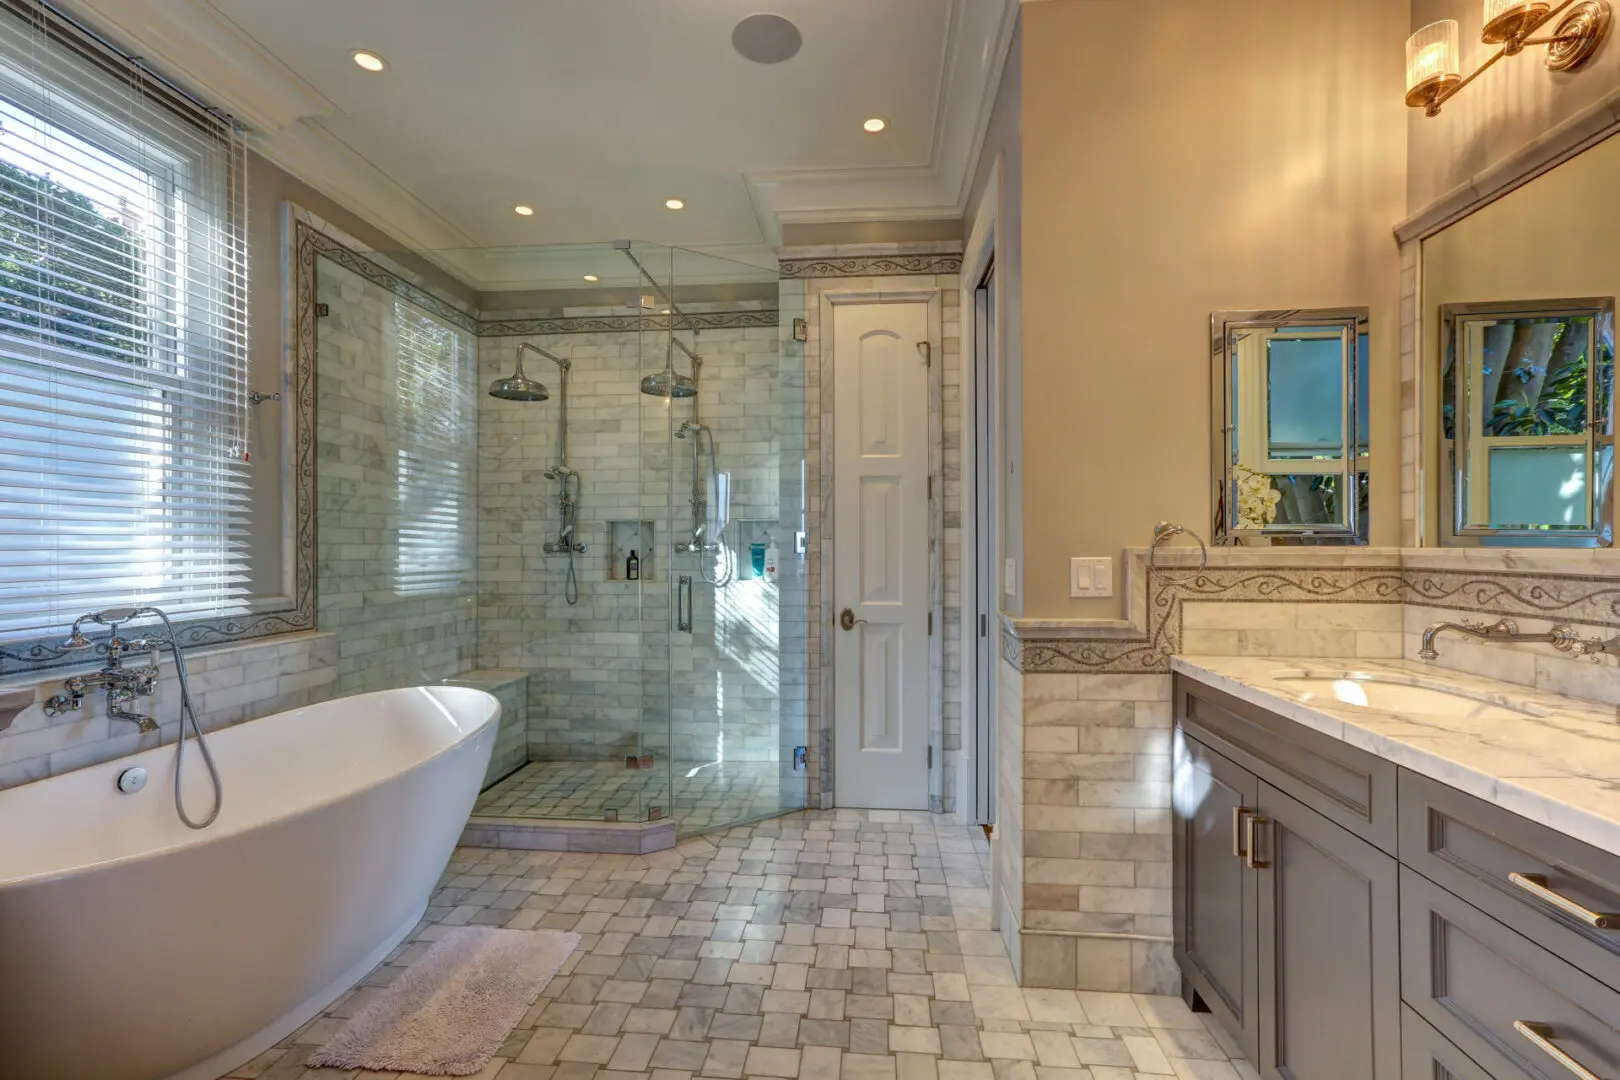 A bathroom with a large walk in shower and a tub.